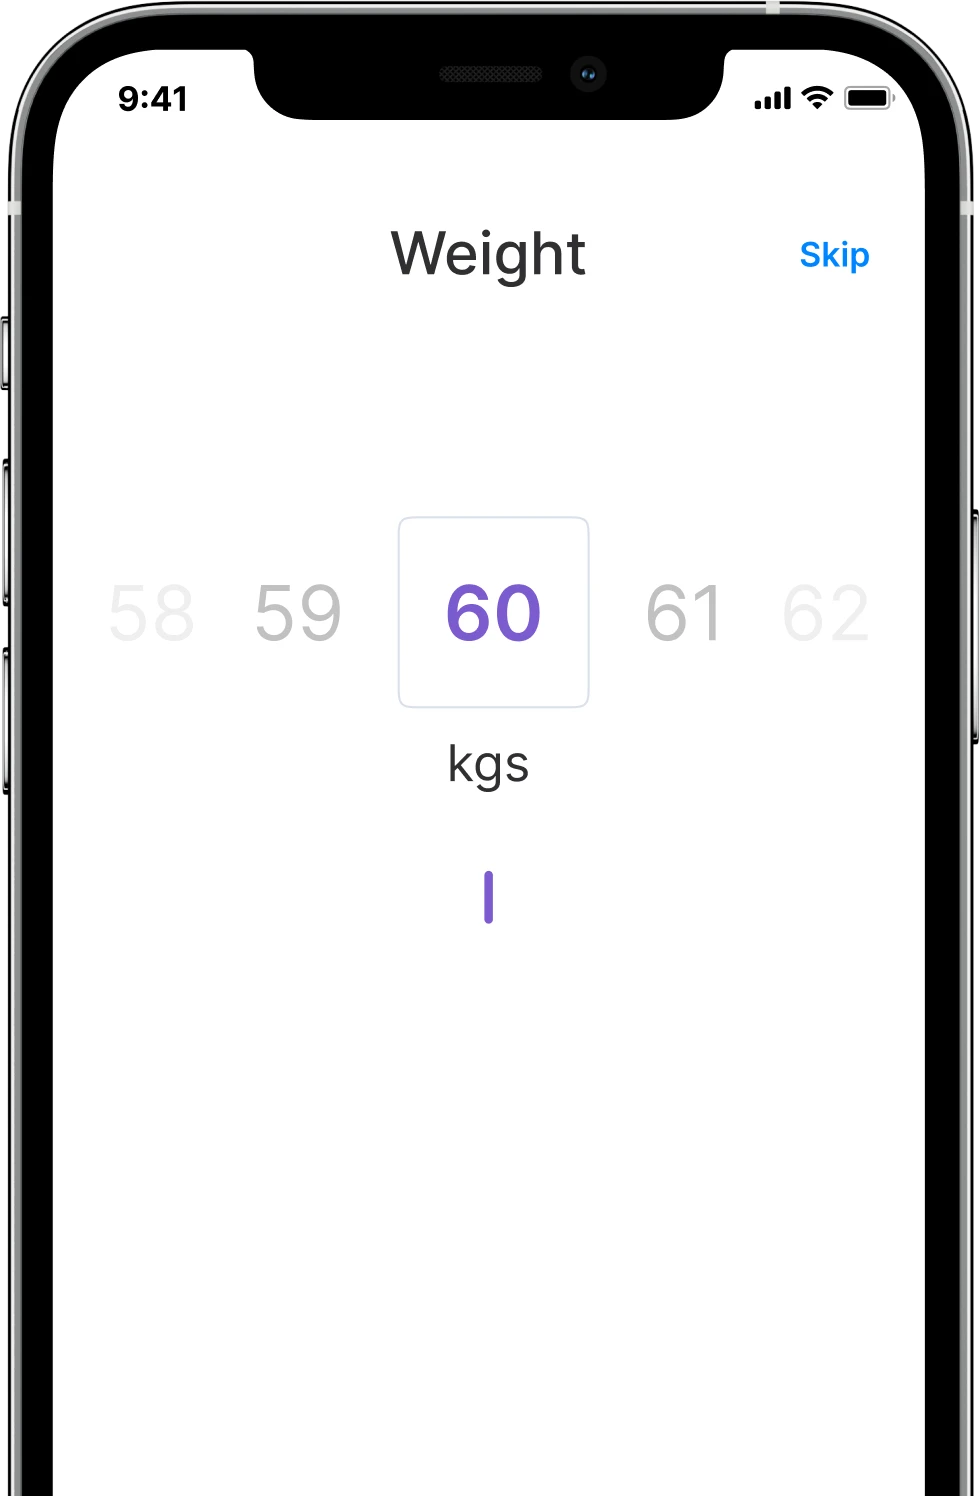 Health-e app weight section screen